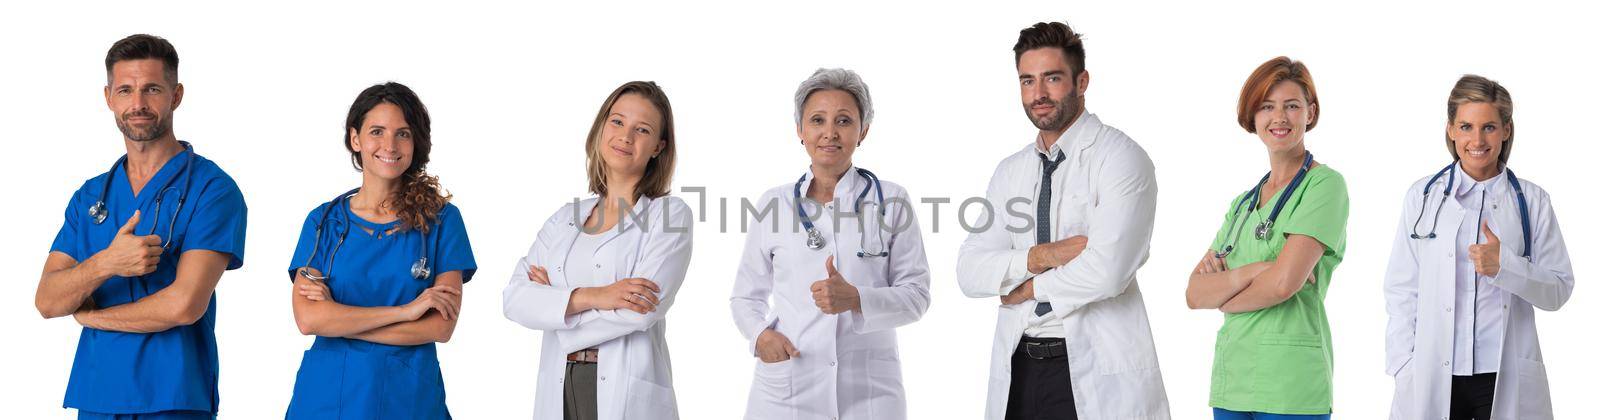 Collection of portraits of medical doctors. Design element, studio isolated on white background